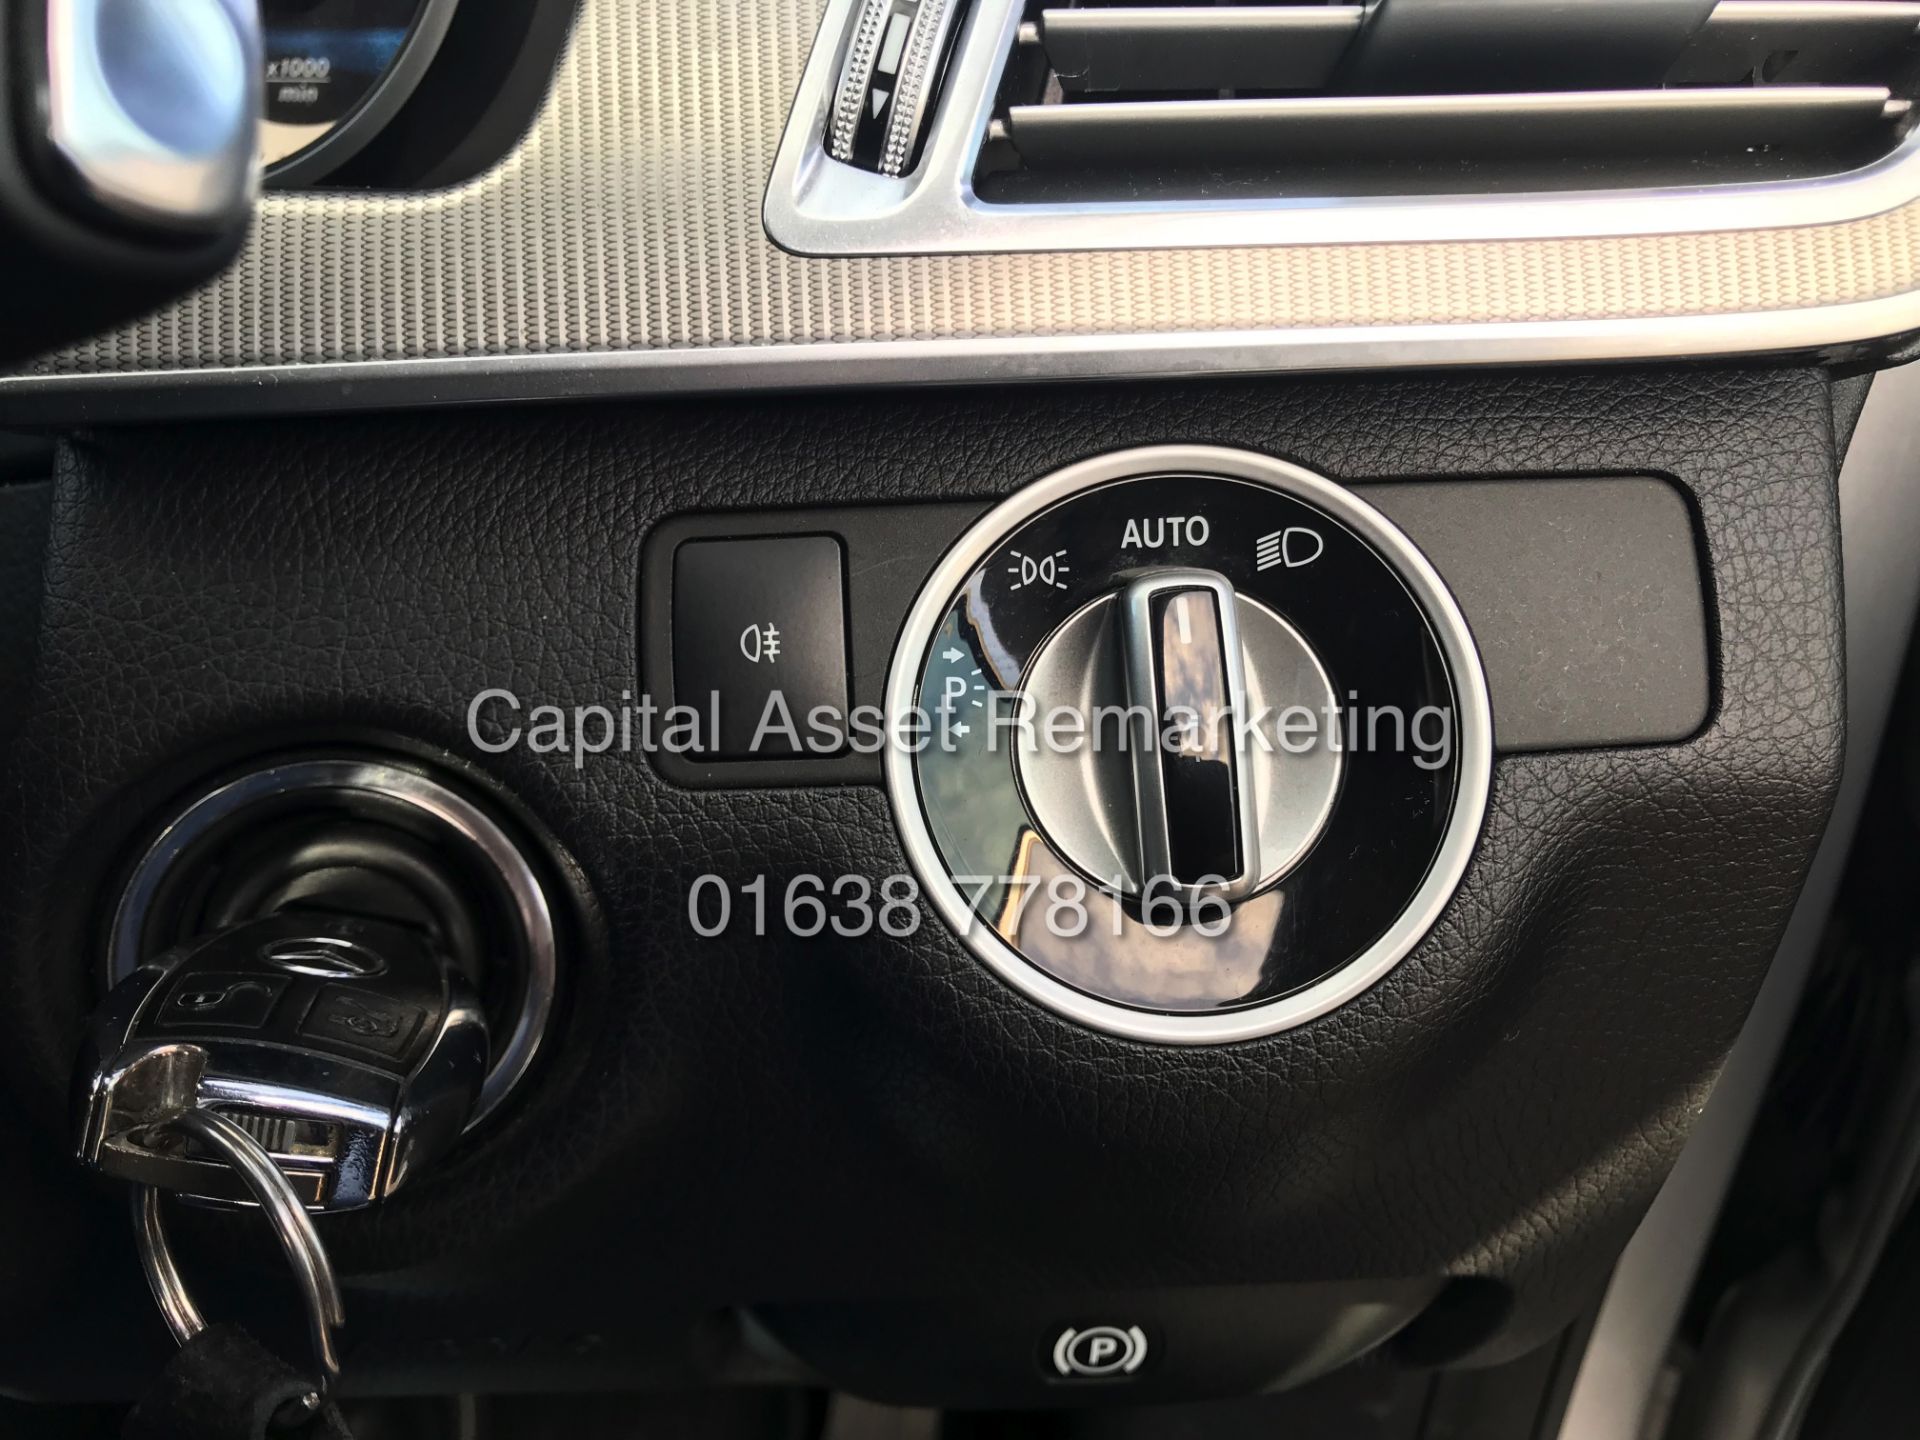 MERCEDES E220d "SPECIAL EQUIPMENT" 7G TRONIC AUTO (2015 MODEL) 1 OWNER - SAT NAV - LEATHER - Image 24 of 26